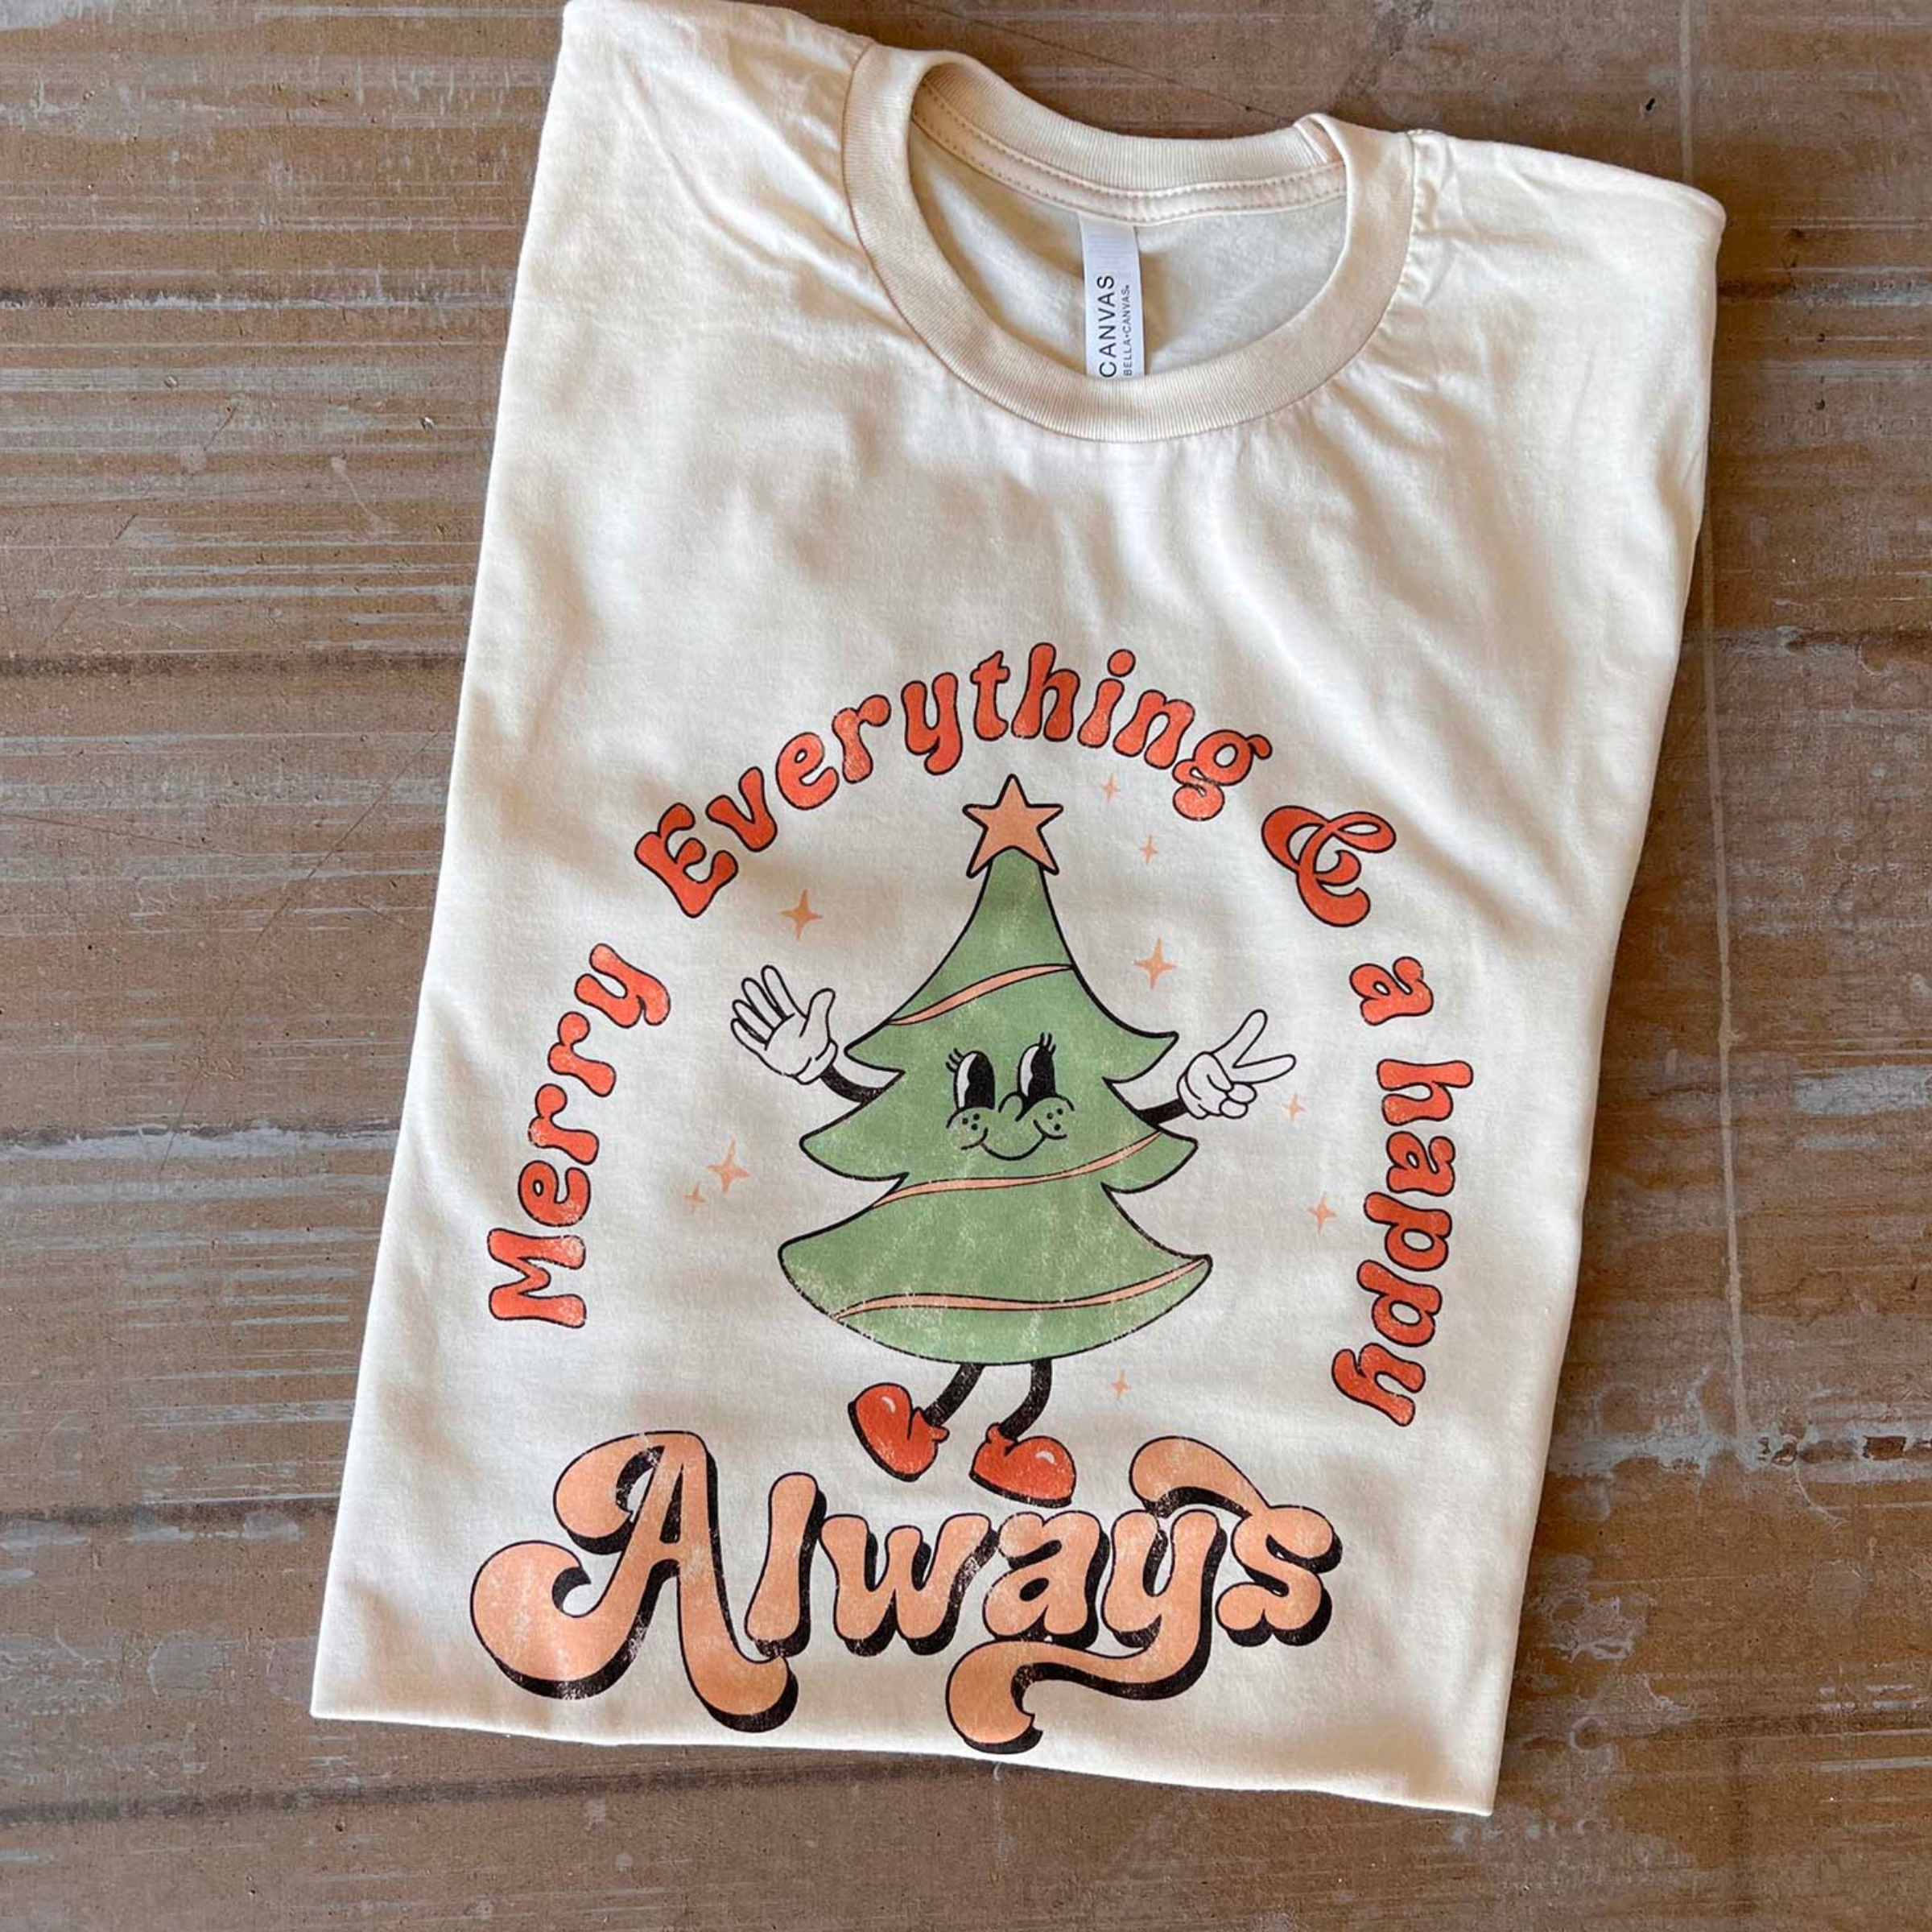 This cream Bella + Canvas tee includes a crew neckline, short sleeves, and a graphic that says "Merry Everything & a happy Always" in a cute mix of fonts with a Christmas Tree throwing up the peace sign. This tee is shown as a folded flat lay. 